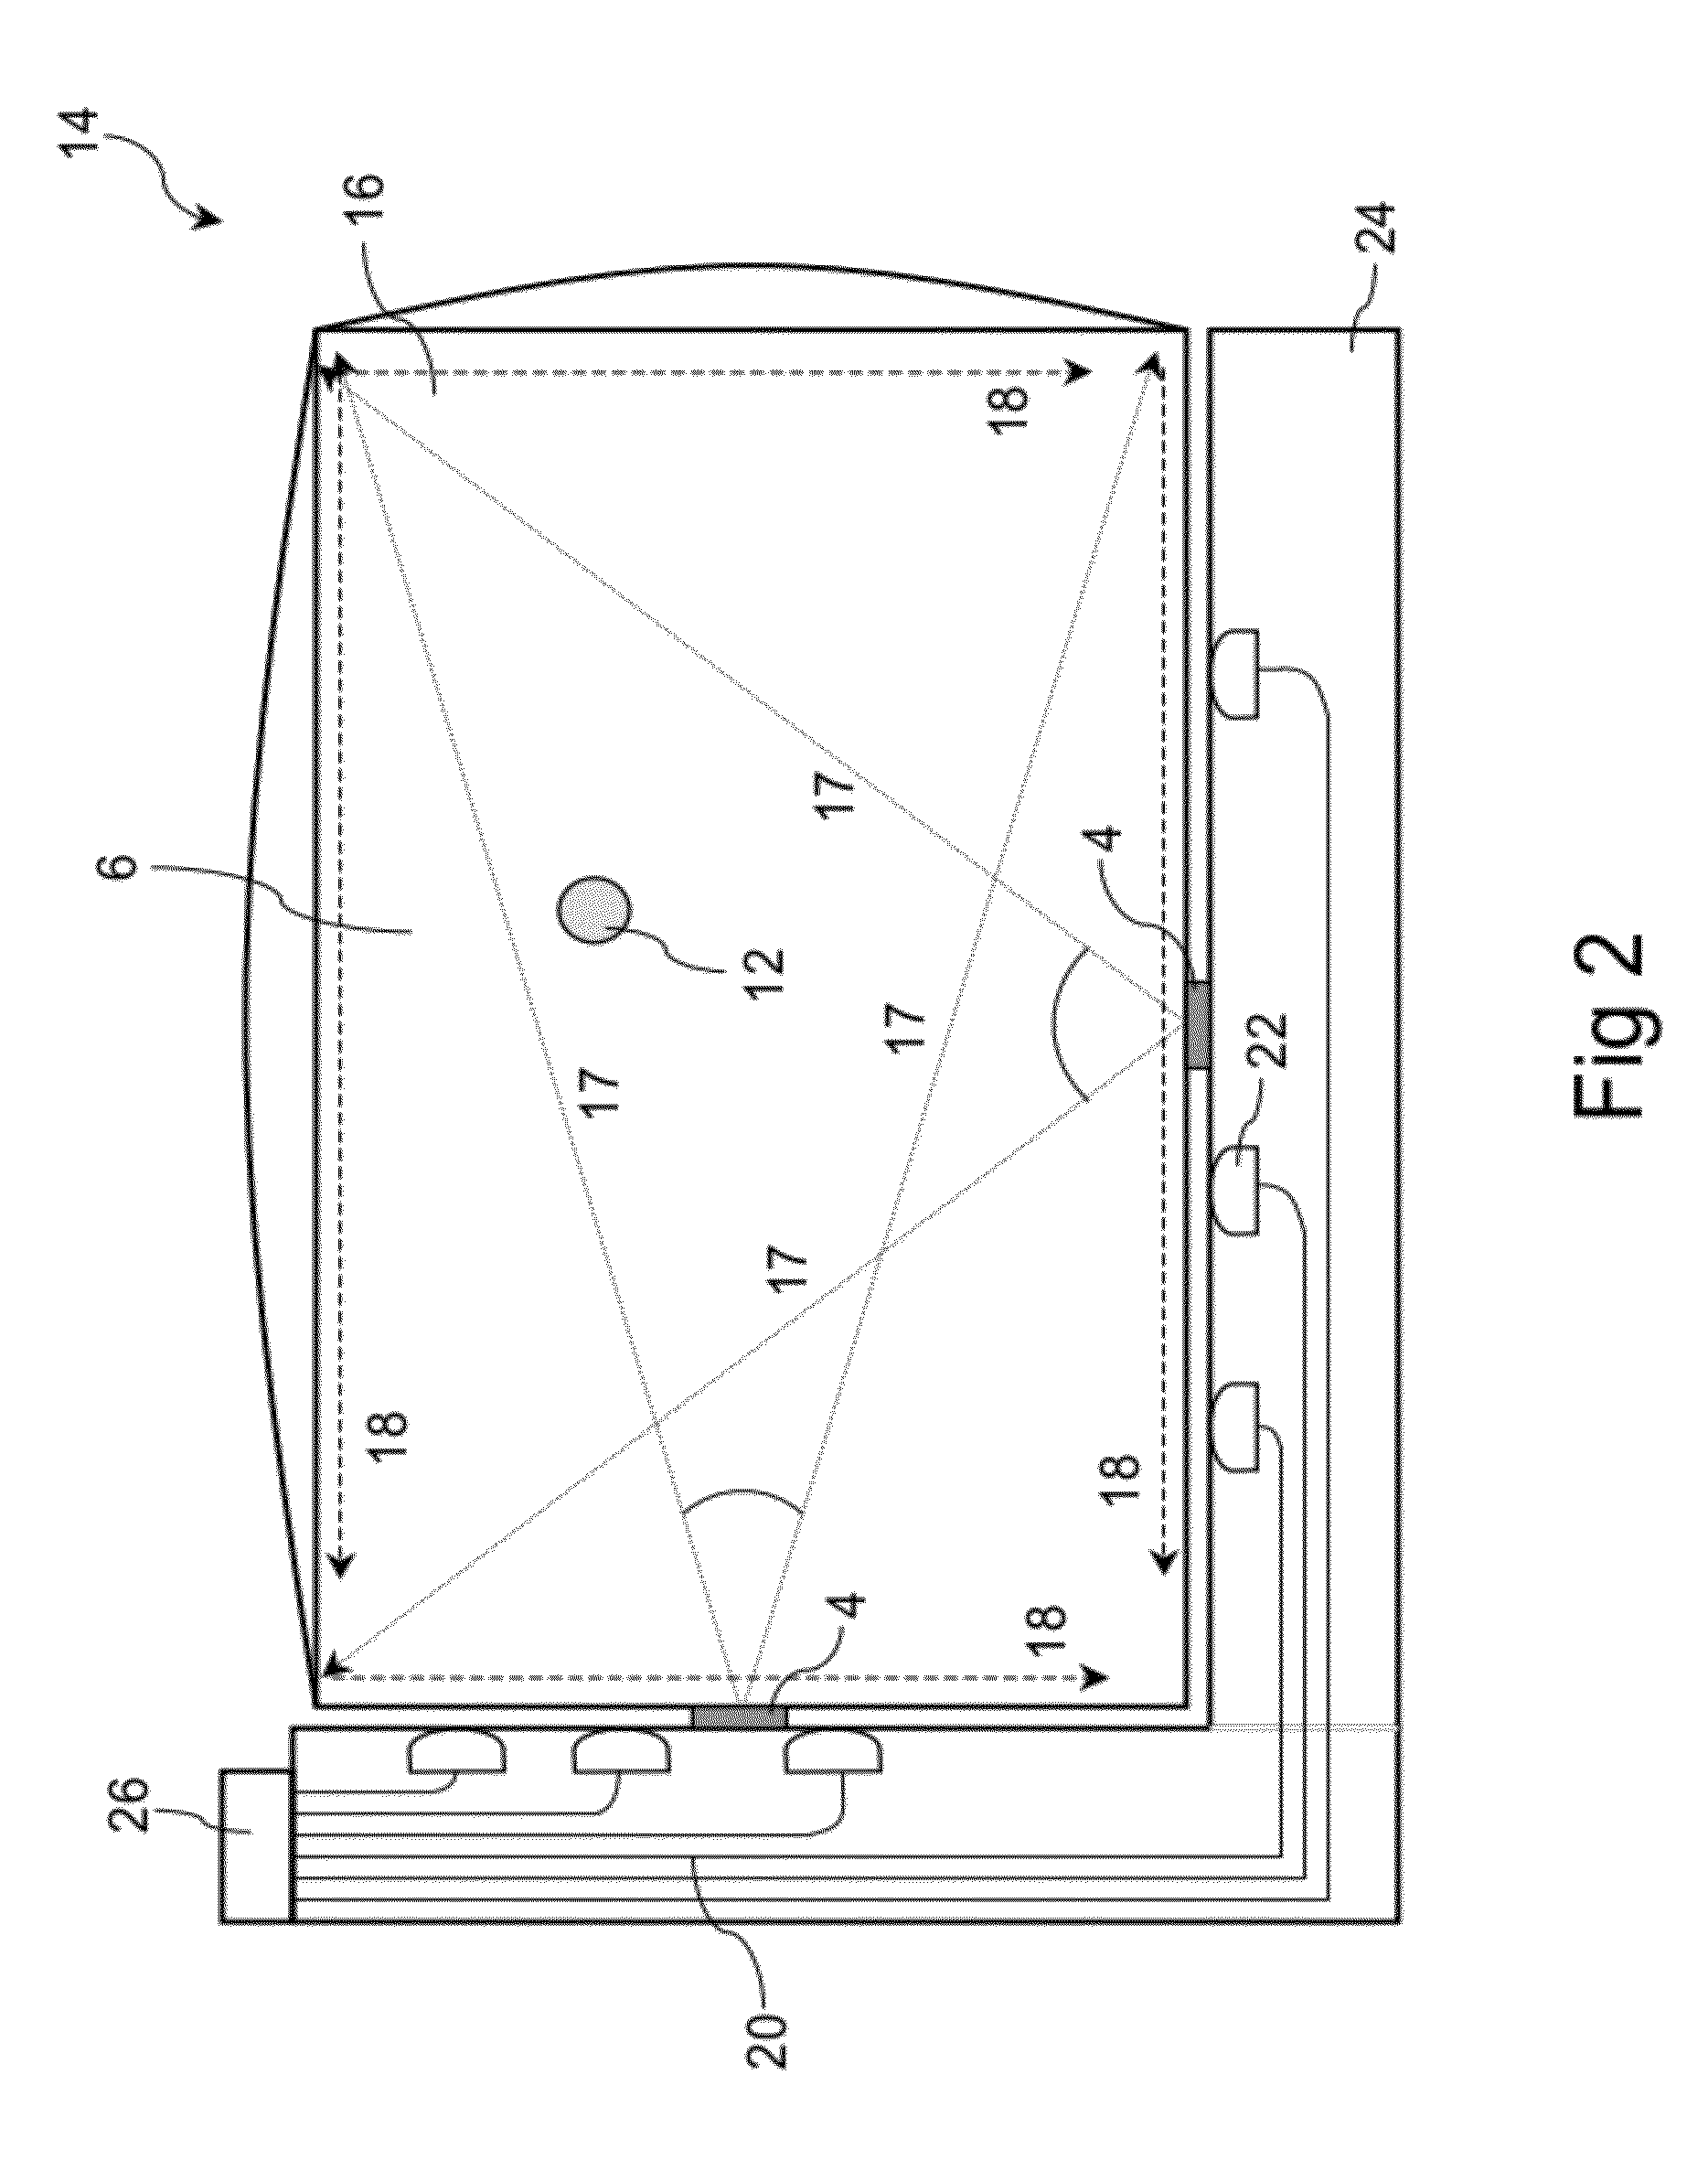 Infrared touch screen with simplified components